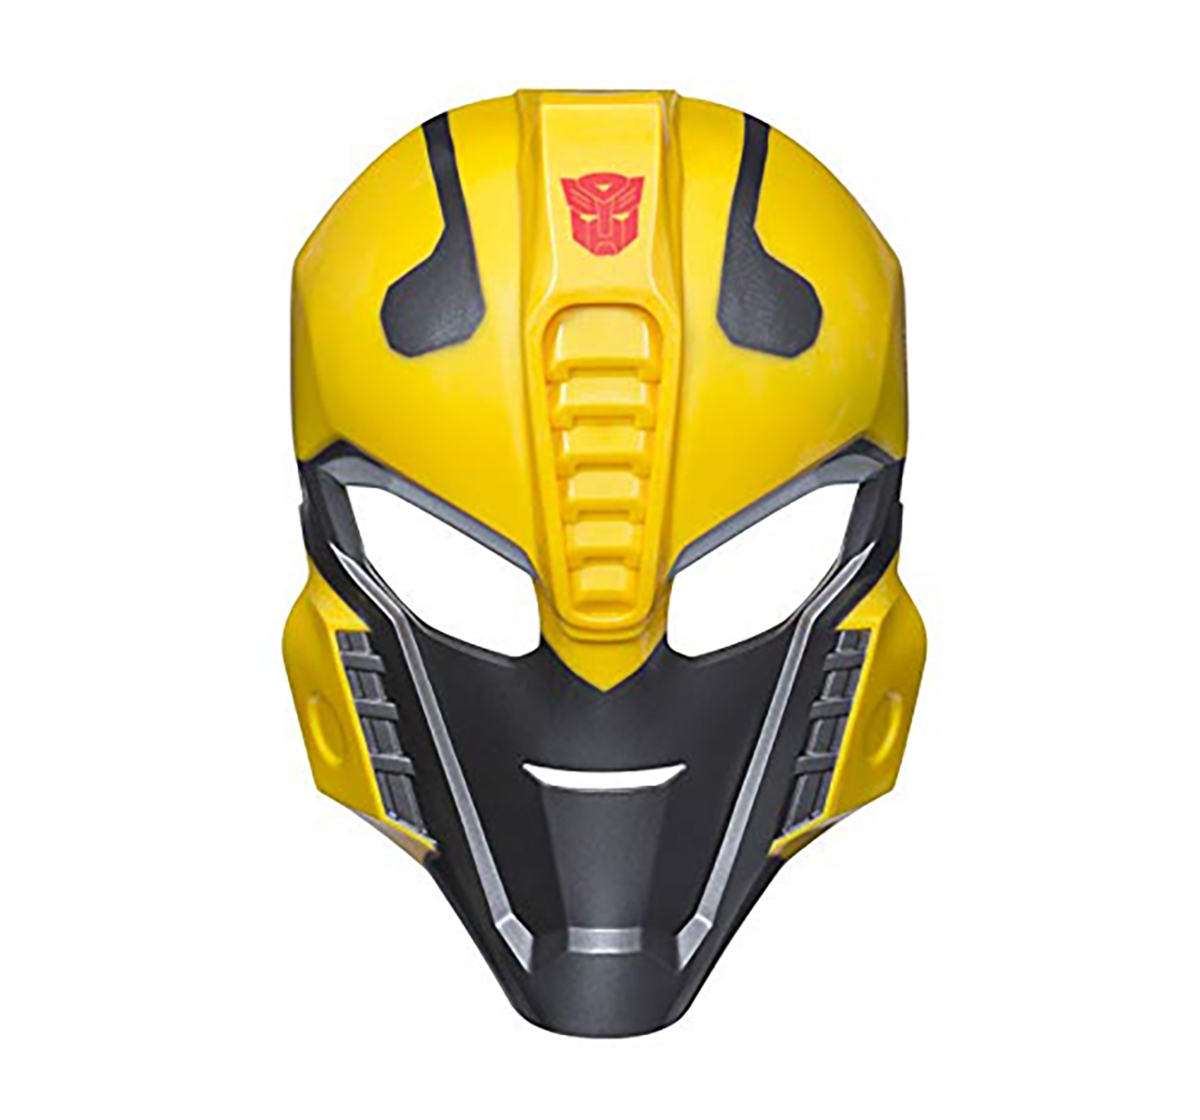 Transformers | Transformers Bumblebee Mask Action Figure Play Sets for Kids age 5Y+ 1